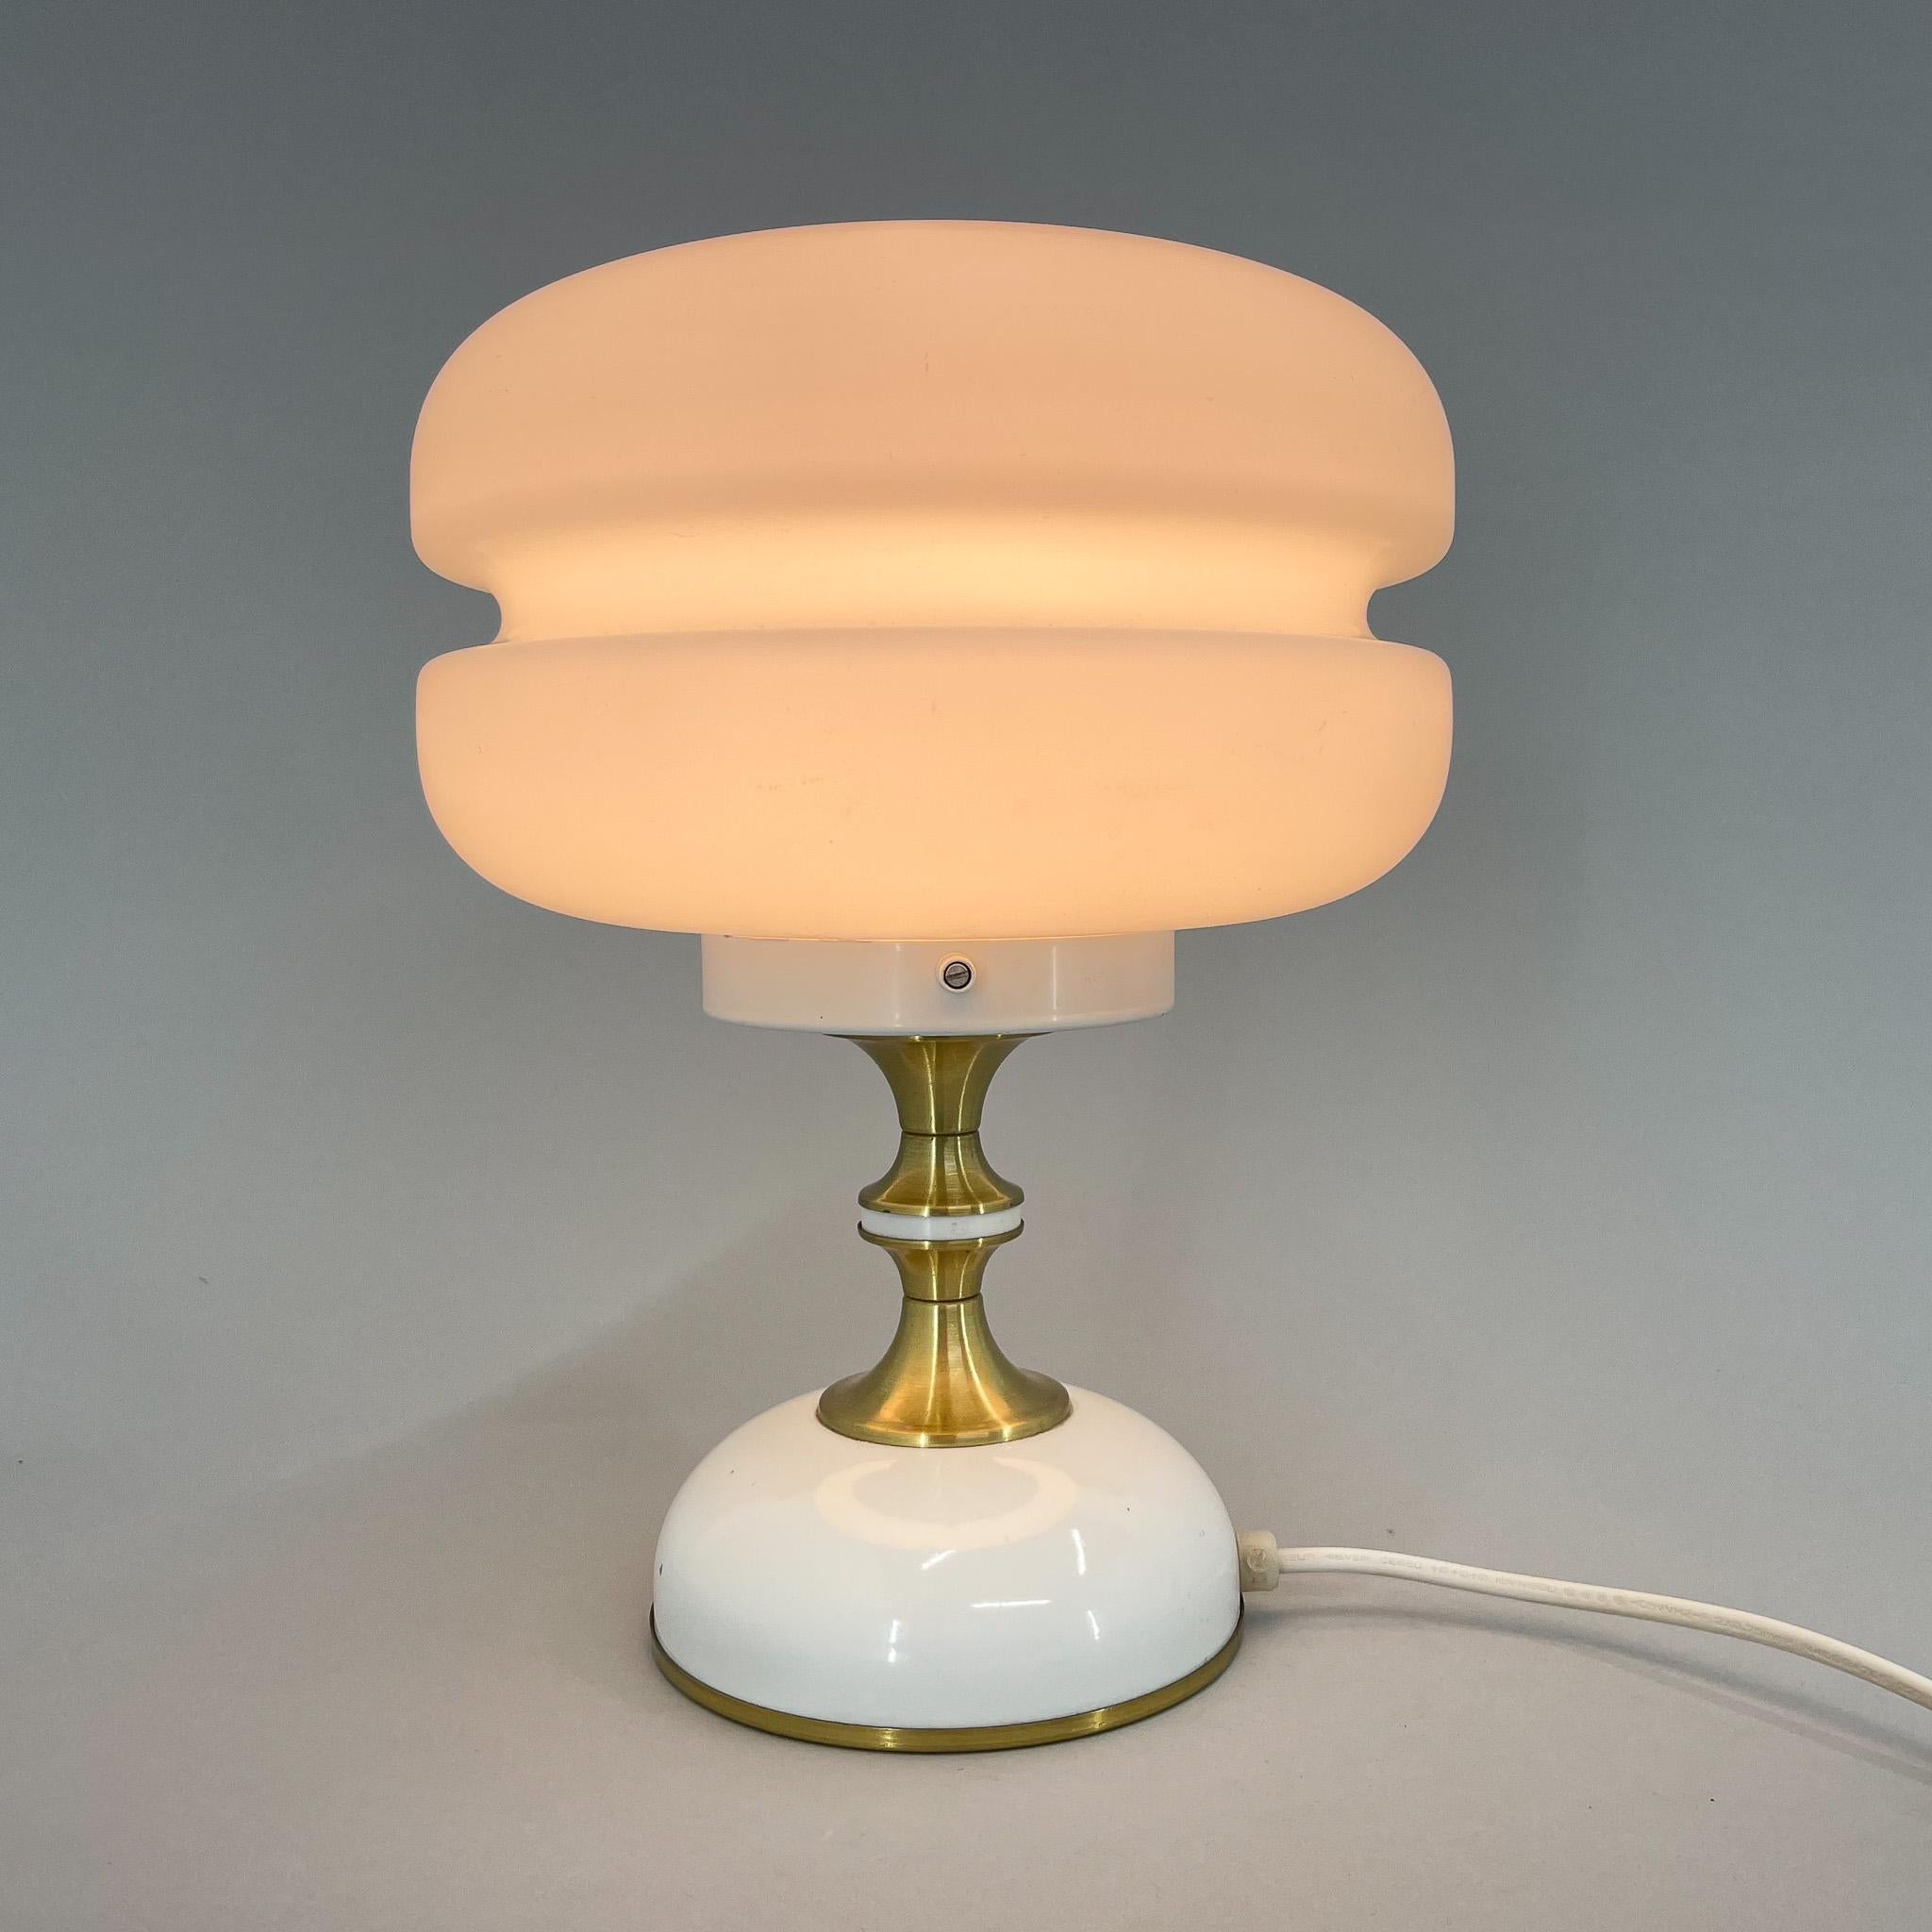 Vintage table lamp produced in former Czechoslovakia by famous Napako in the 1970s. Bulbs: 1x E25-27.